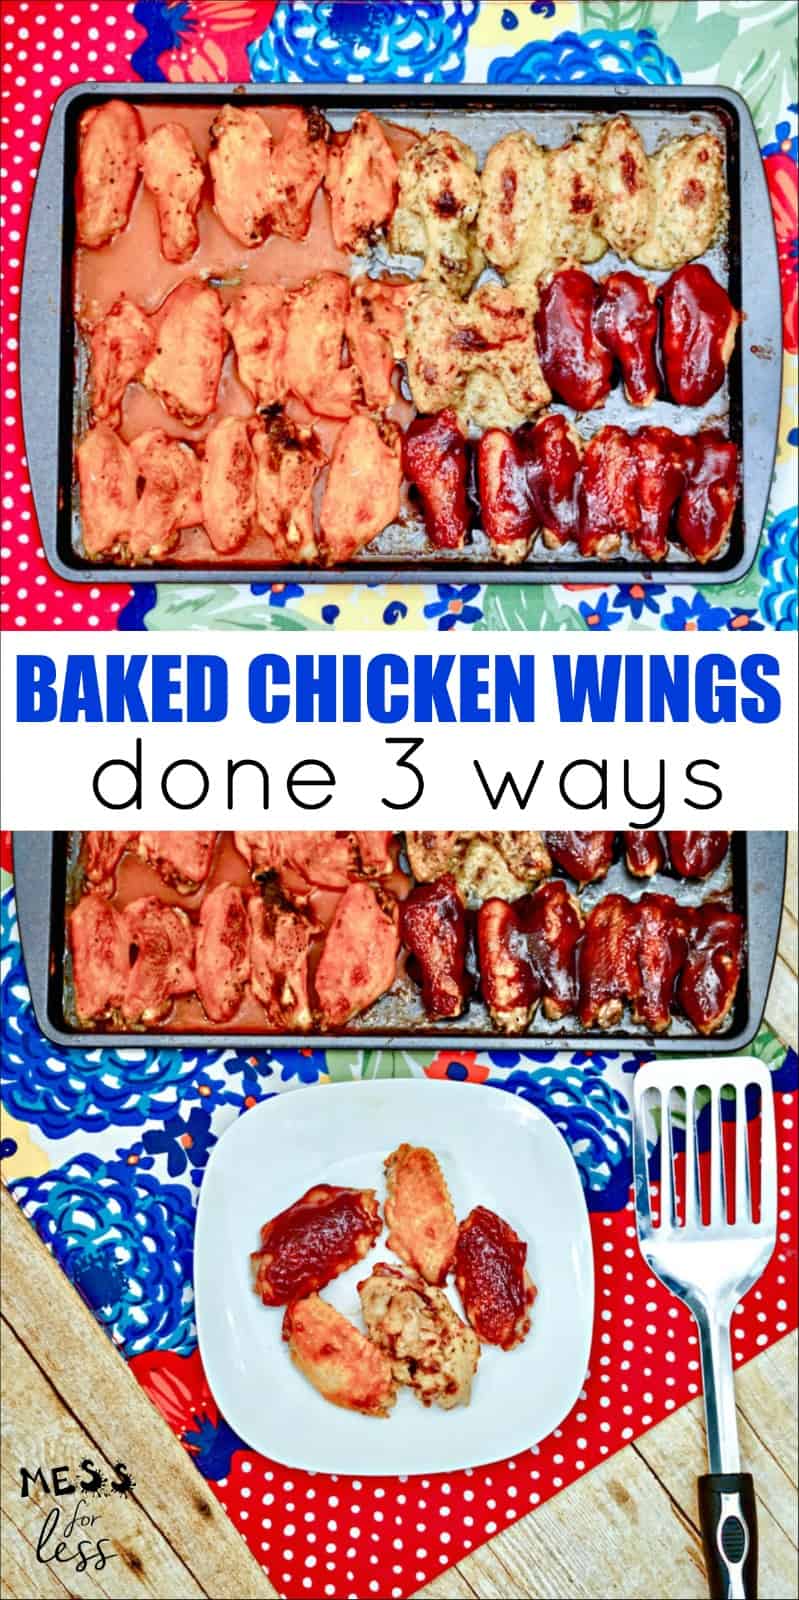 Oven Baked Chicken Wings - 3 Ways! Can't decide on what variety of wings to make for that party or gathering? Make them all! Easy baked chicken wings are a hit! #ovenbakedchickenwings #chickenwings #bakedwings #chickenrecipe